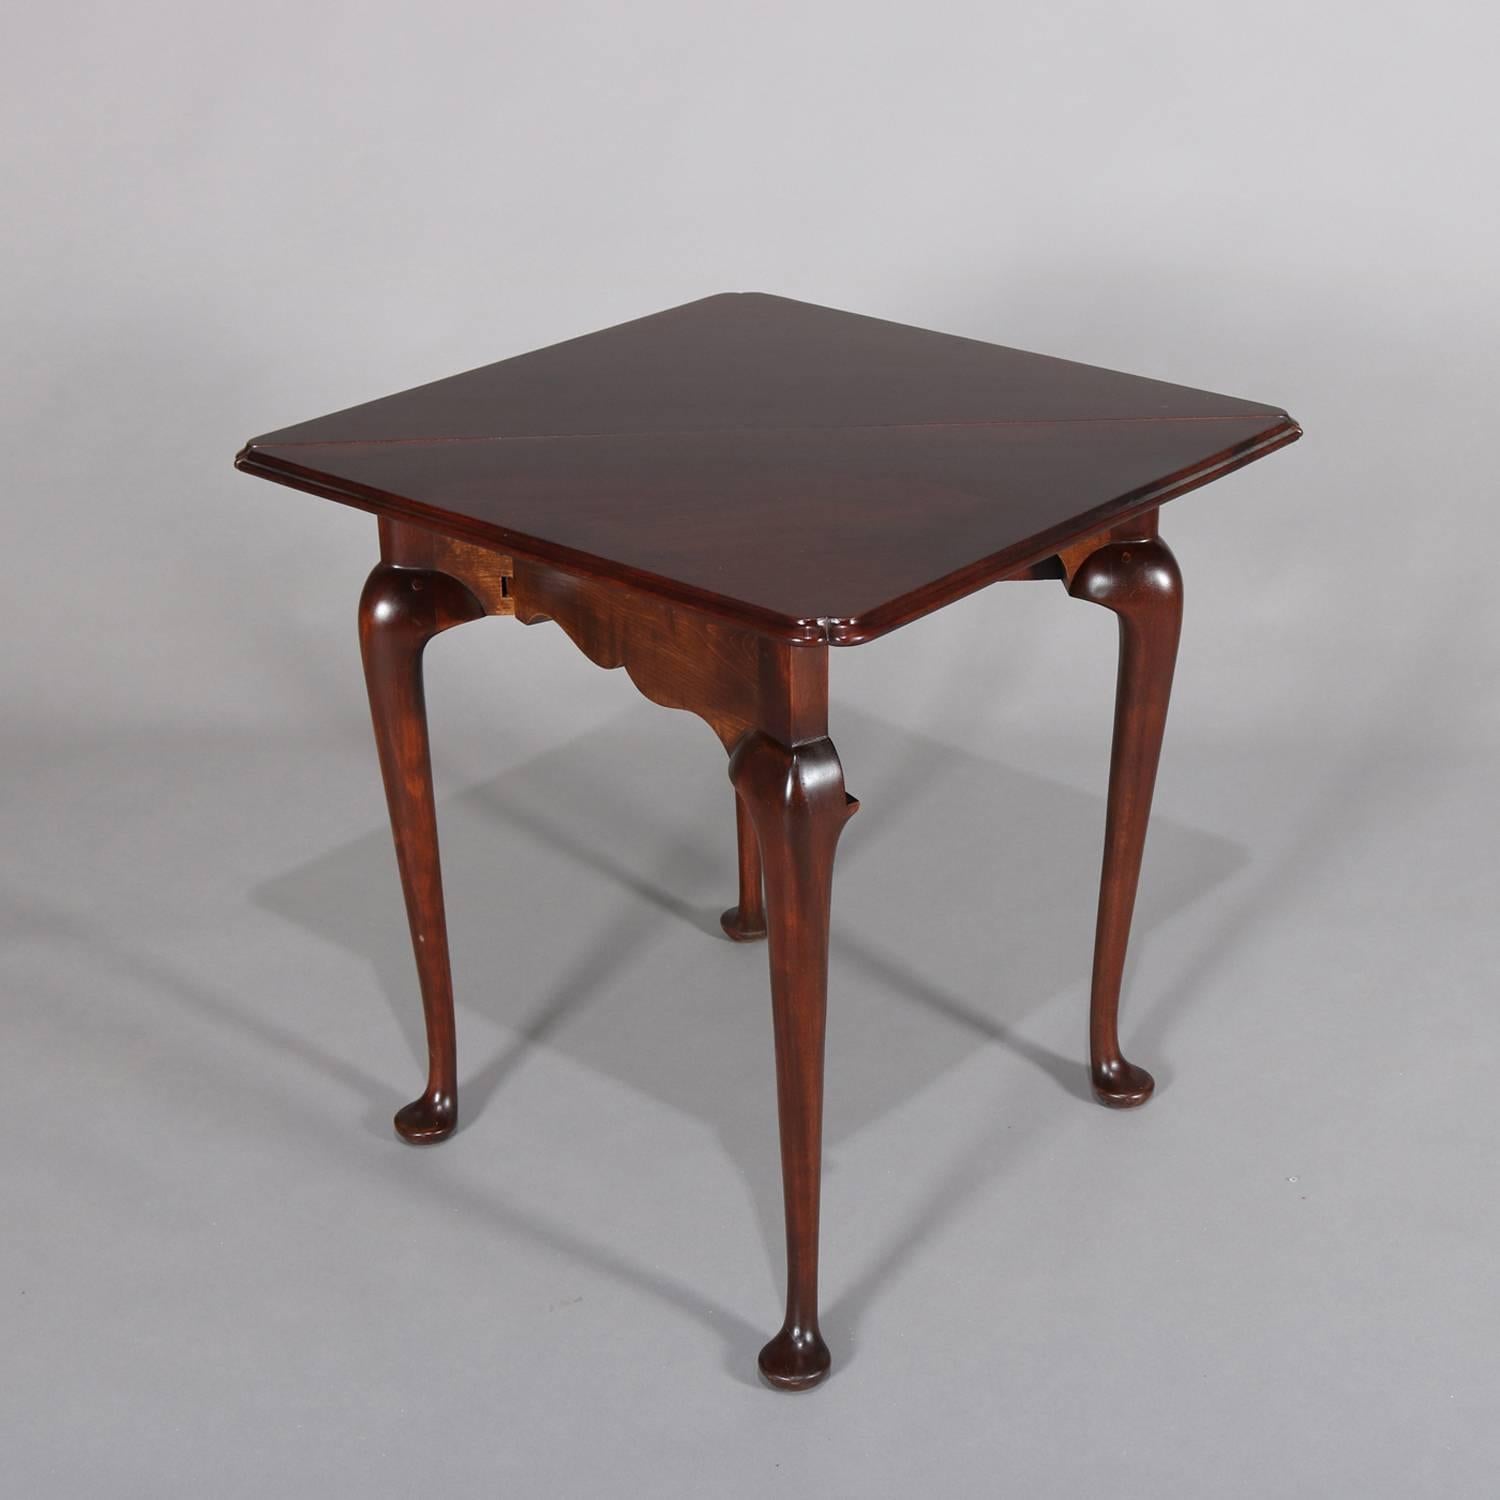 Queen Anne Style Mahogany Williamsburg Colonial Napkin Table by Kittinger 1